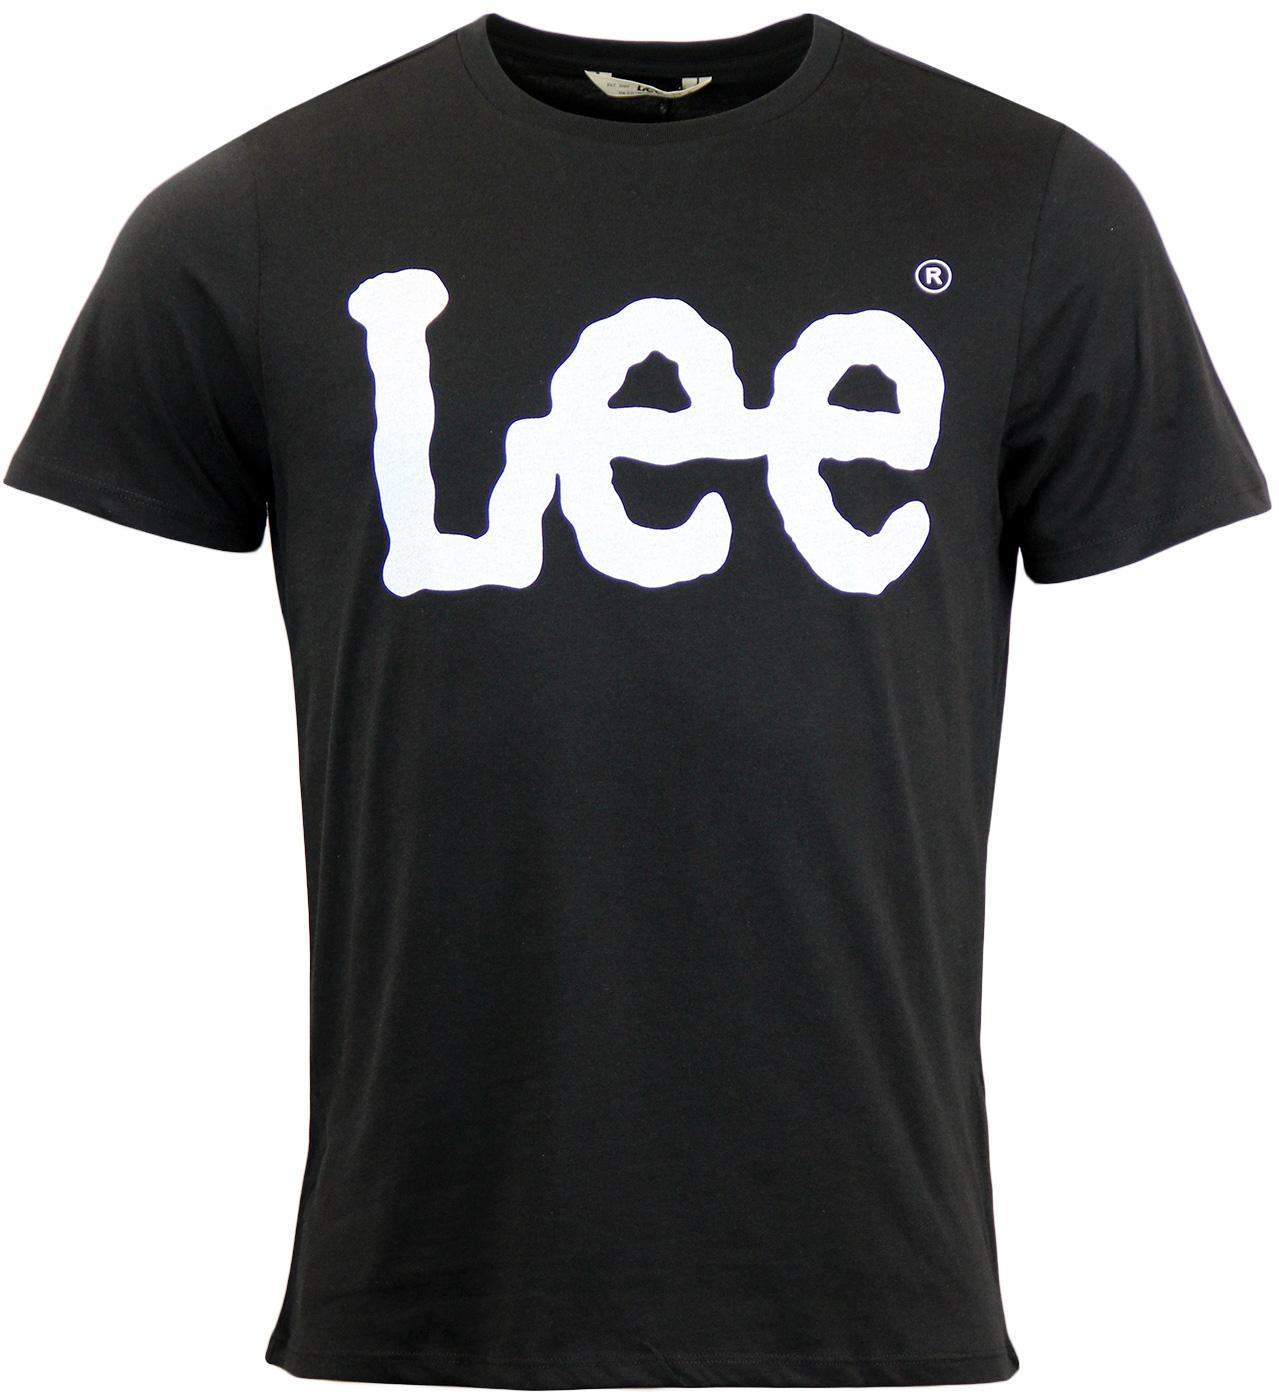 Lee Philippines: Lee price list - Lee Shirts, Pants & Shorts for sale ...